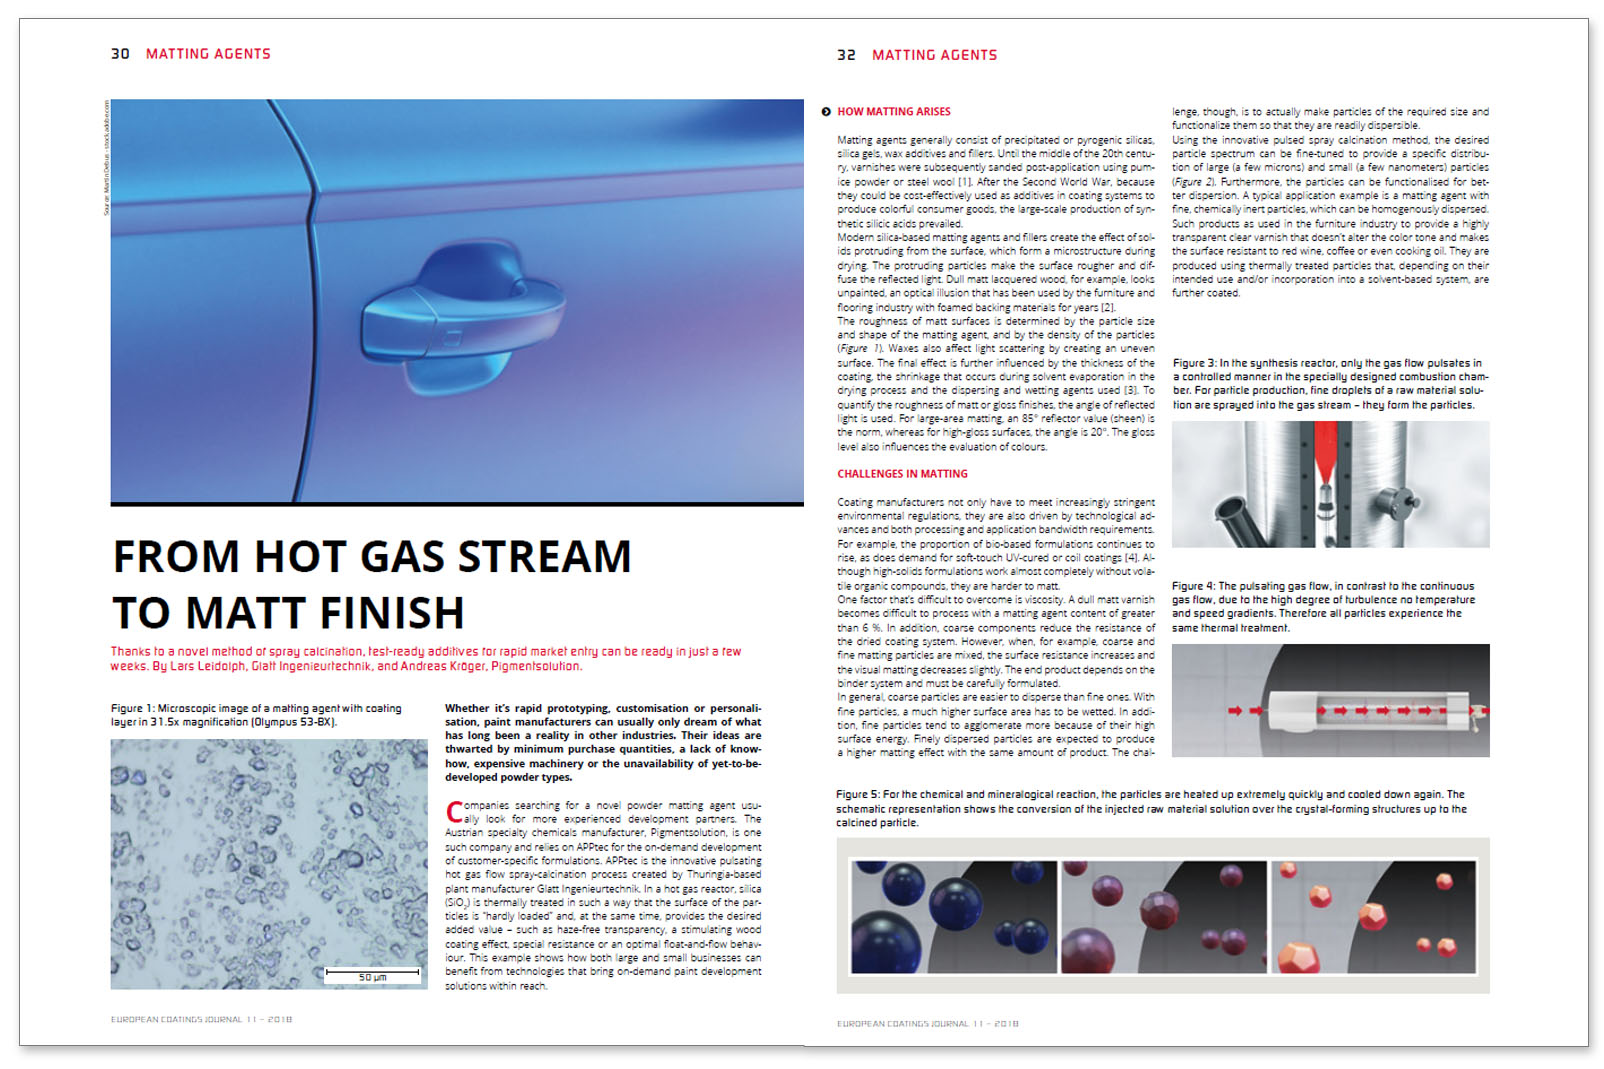 Glatt technical article on ''From hot gas stream to matt finish'', published in the trade magazine European Coatings Journal, November 2018 issue, Vincentz Network GmbH & Co. KG